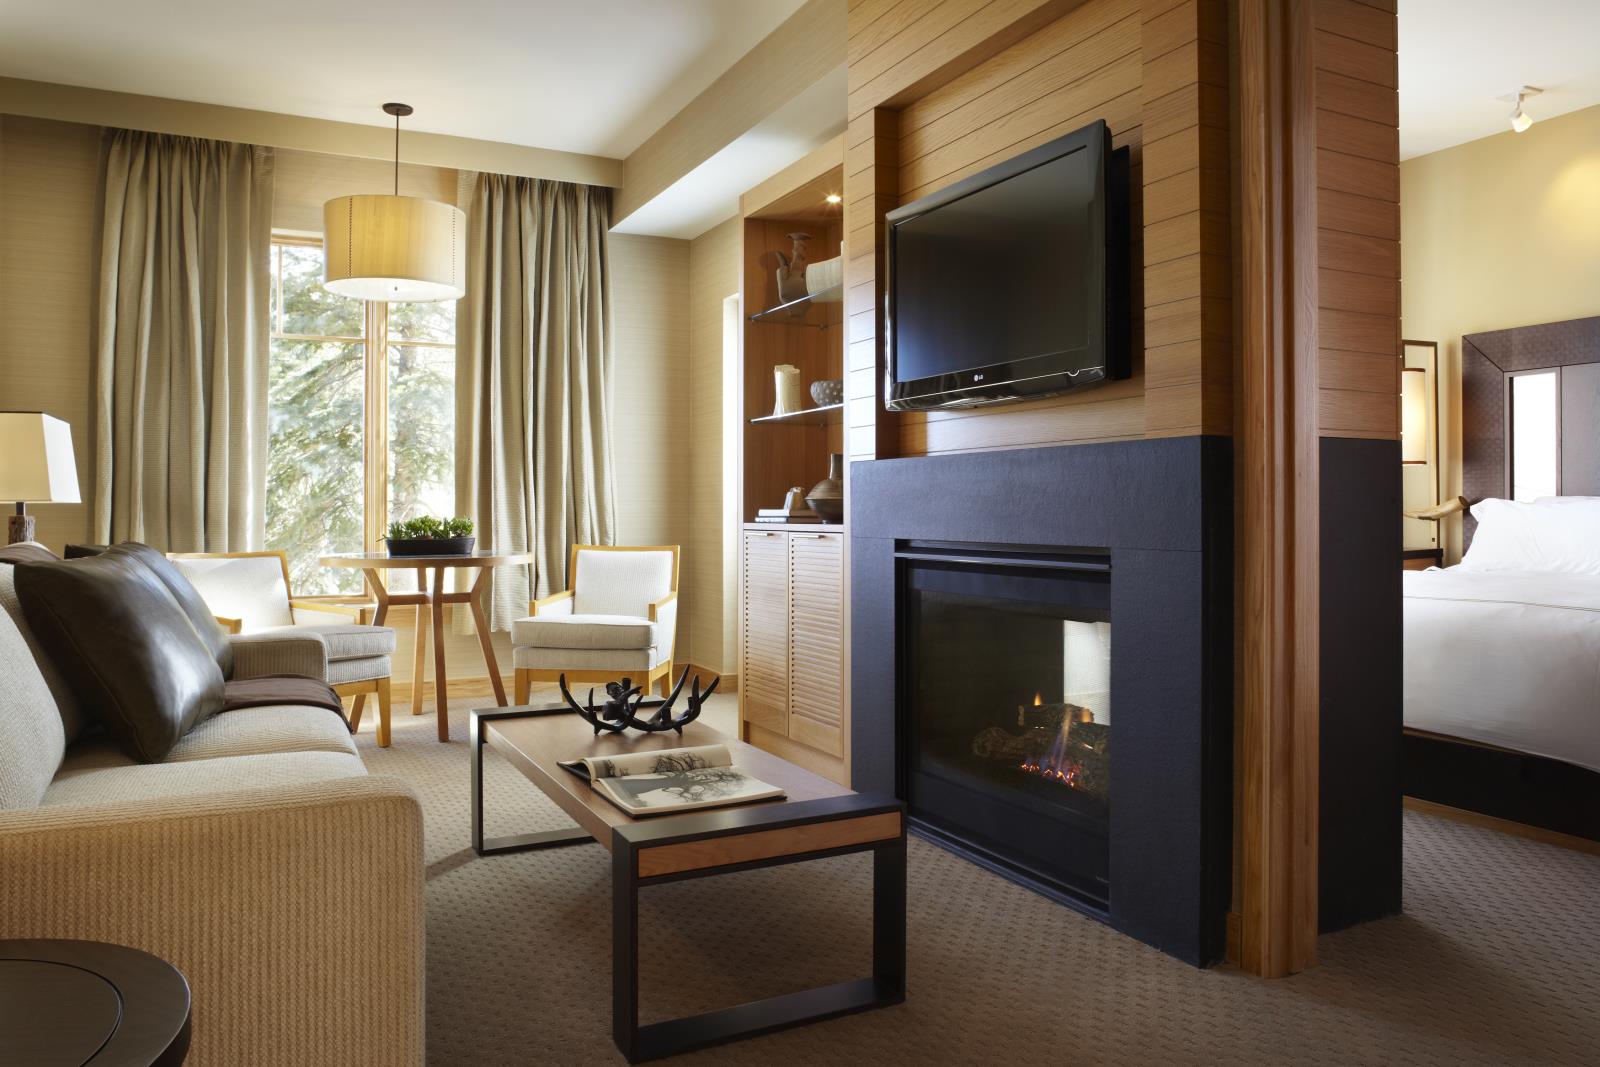 Bedroom Lounge - Viceroy Hotel Snowmass